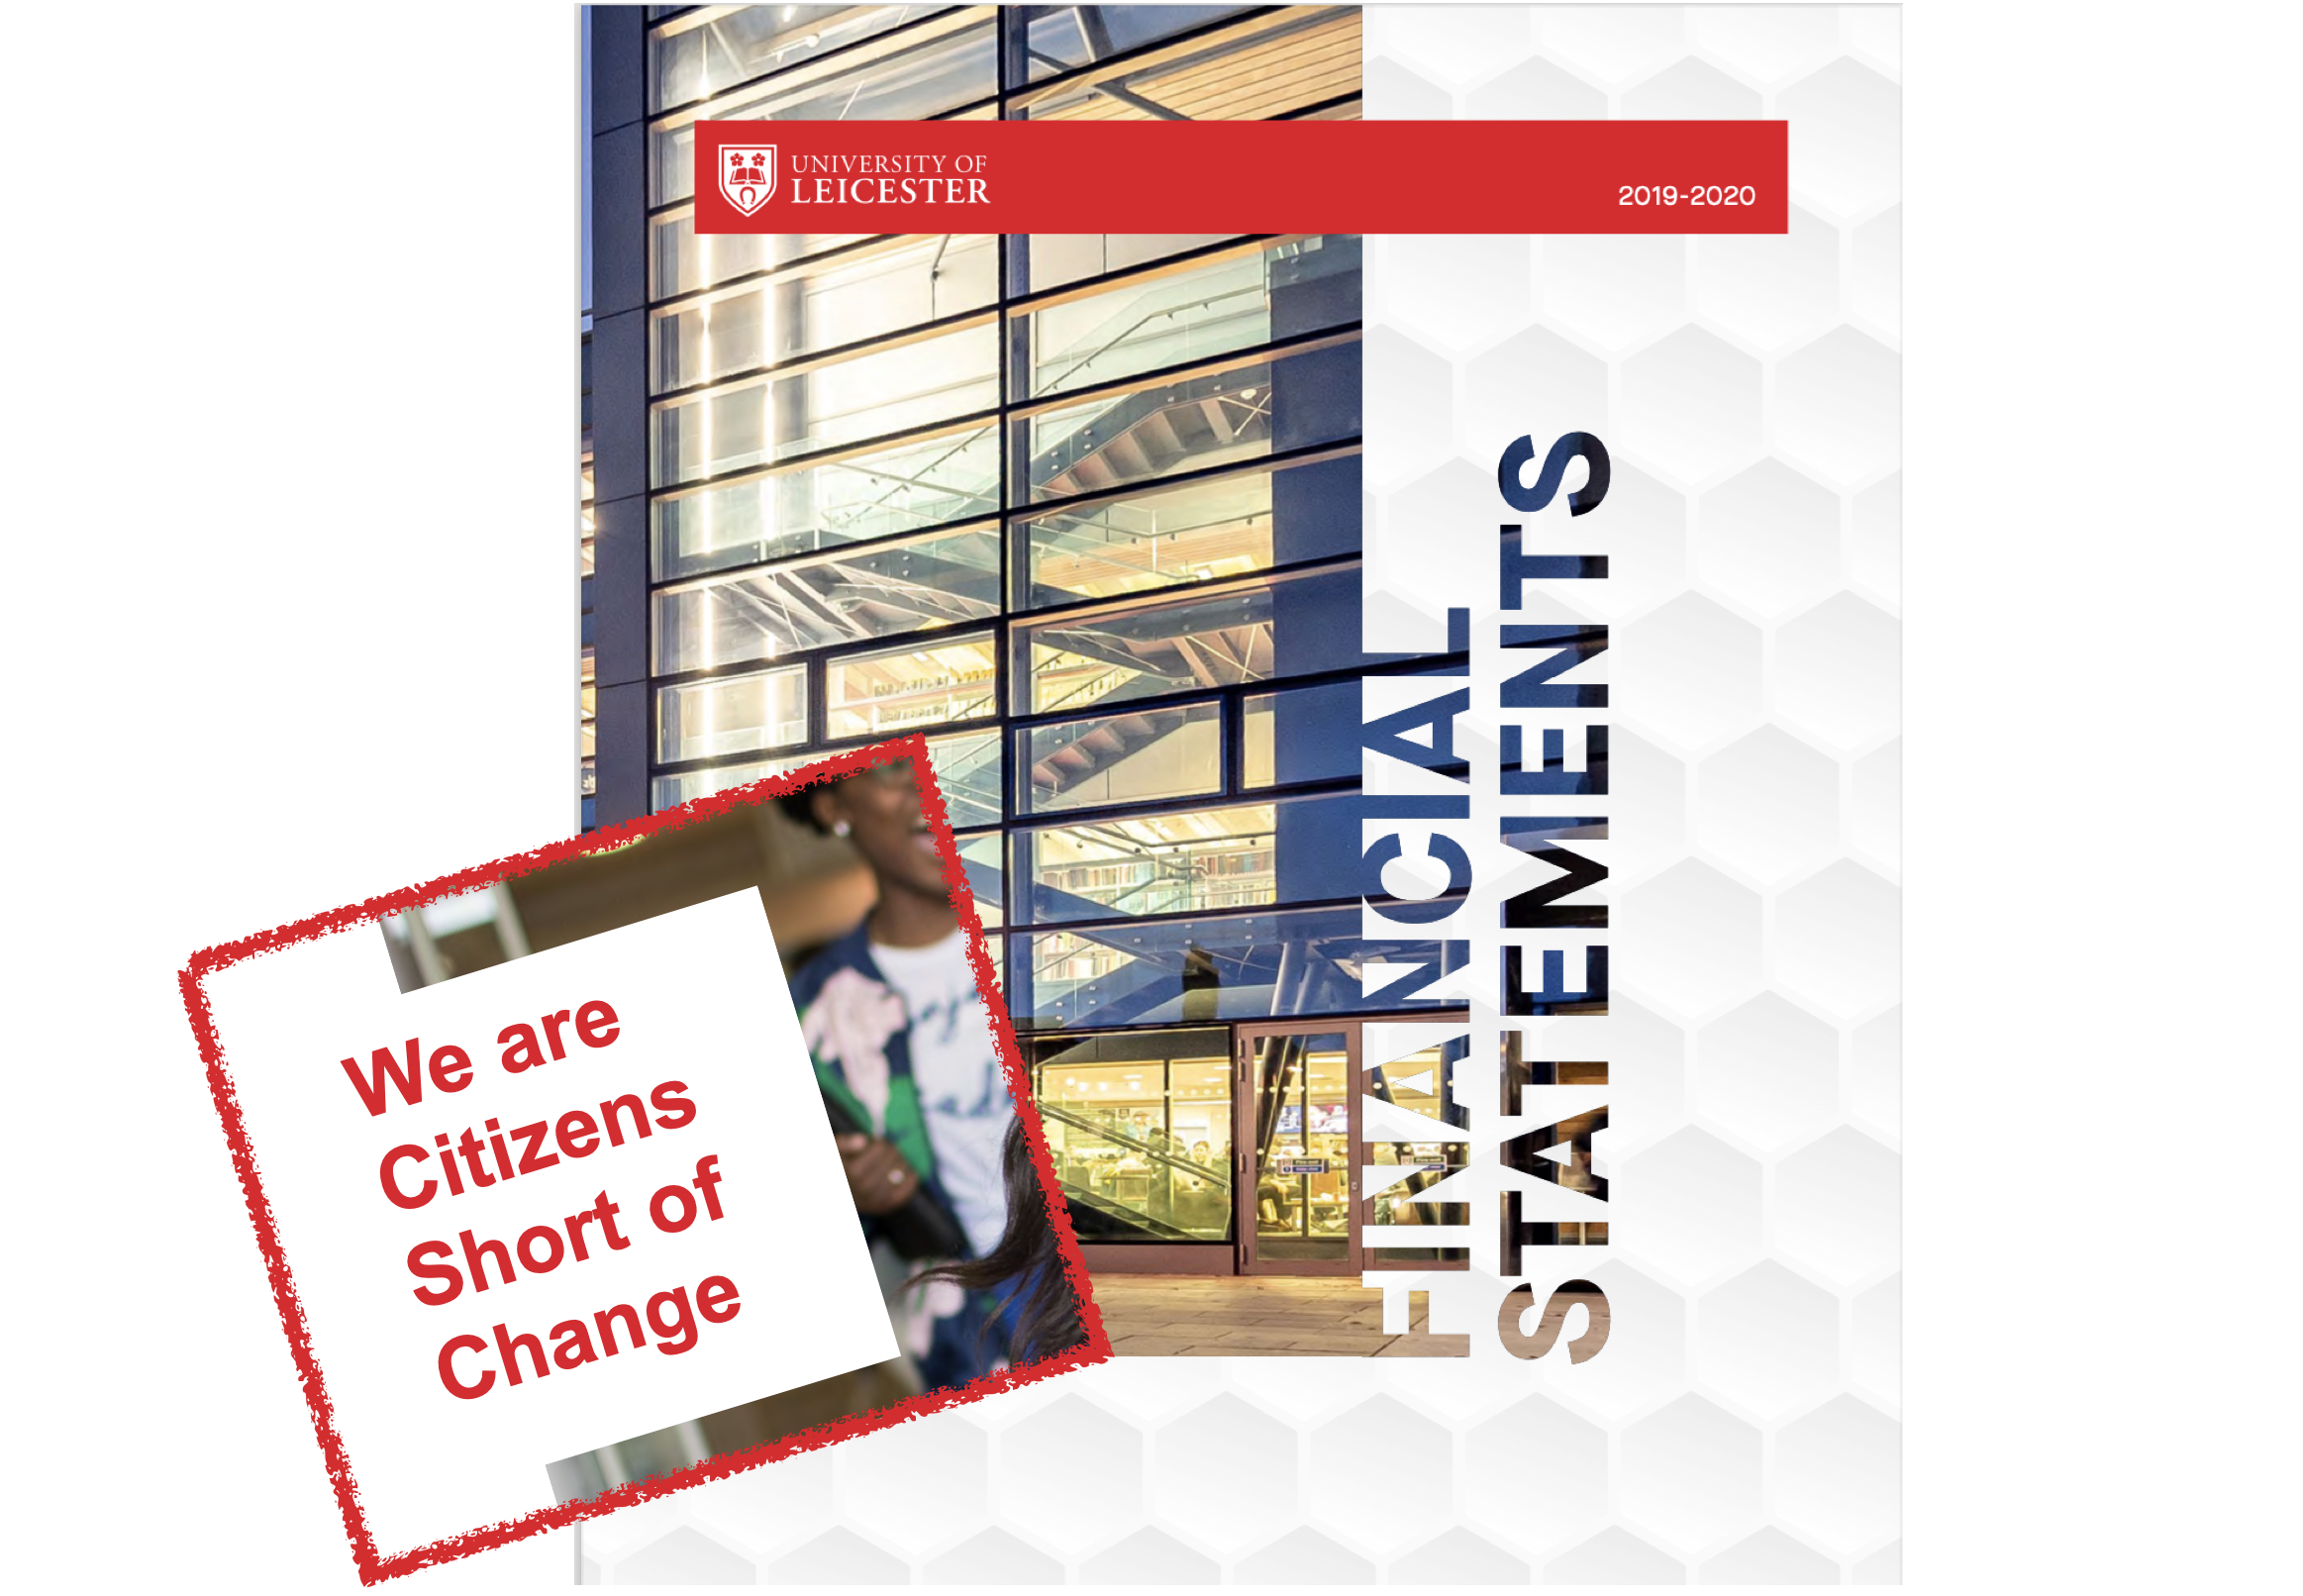 Cover of 2019/20 financial statements with "We are citizens short of change" text